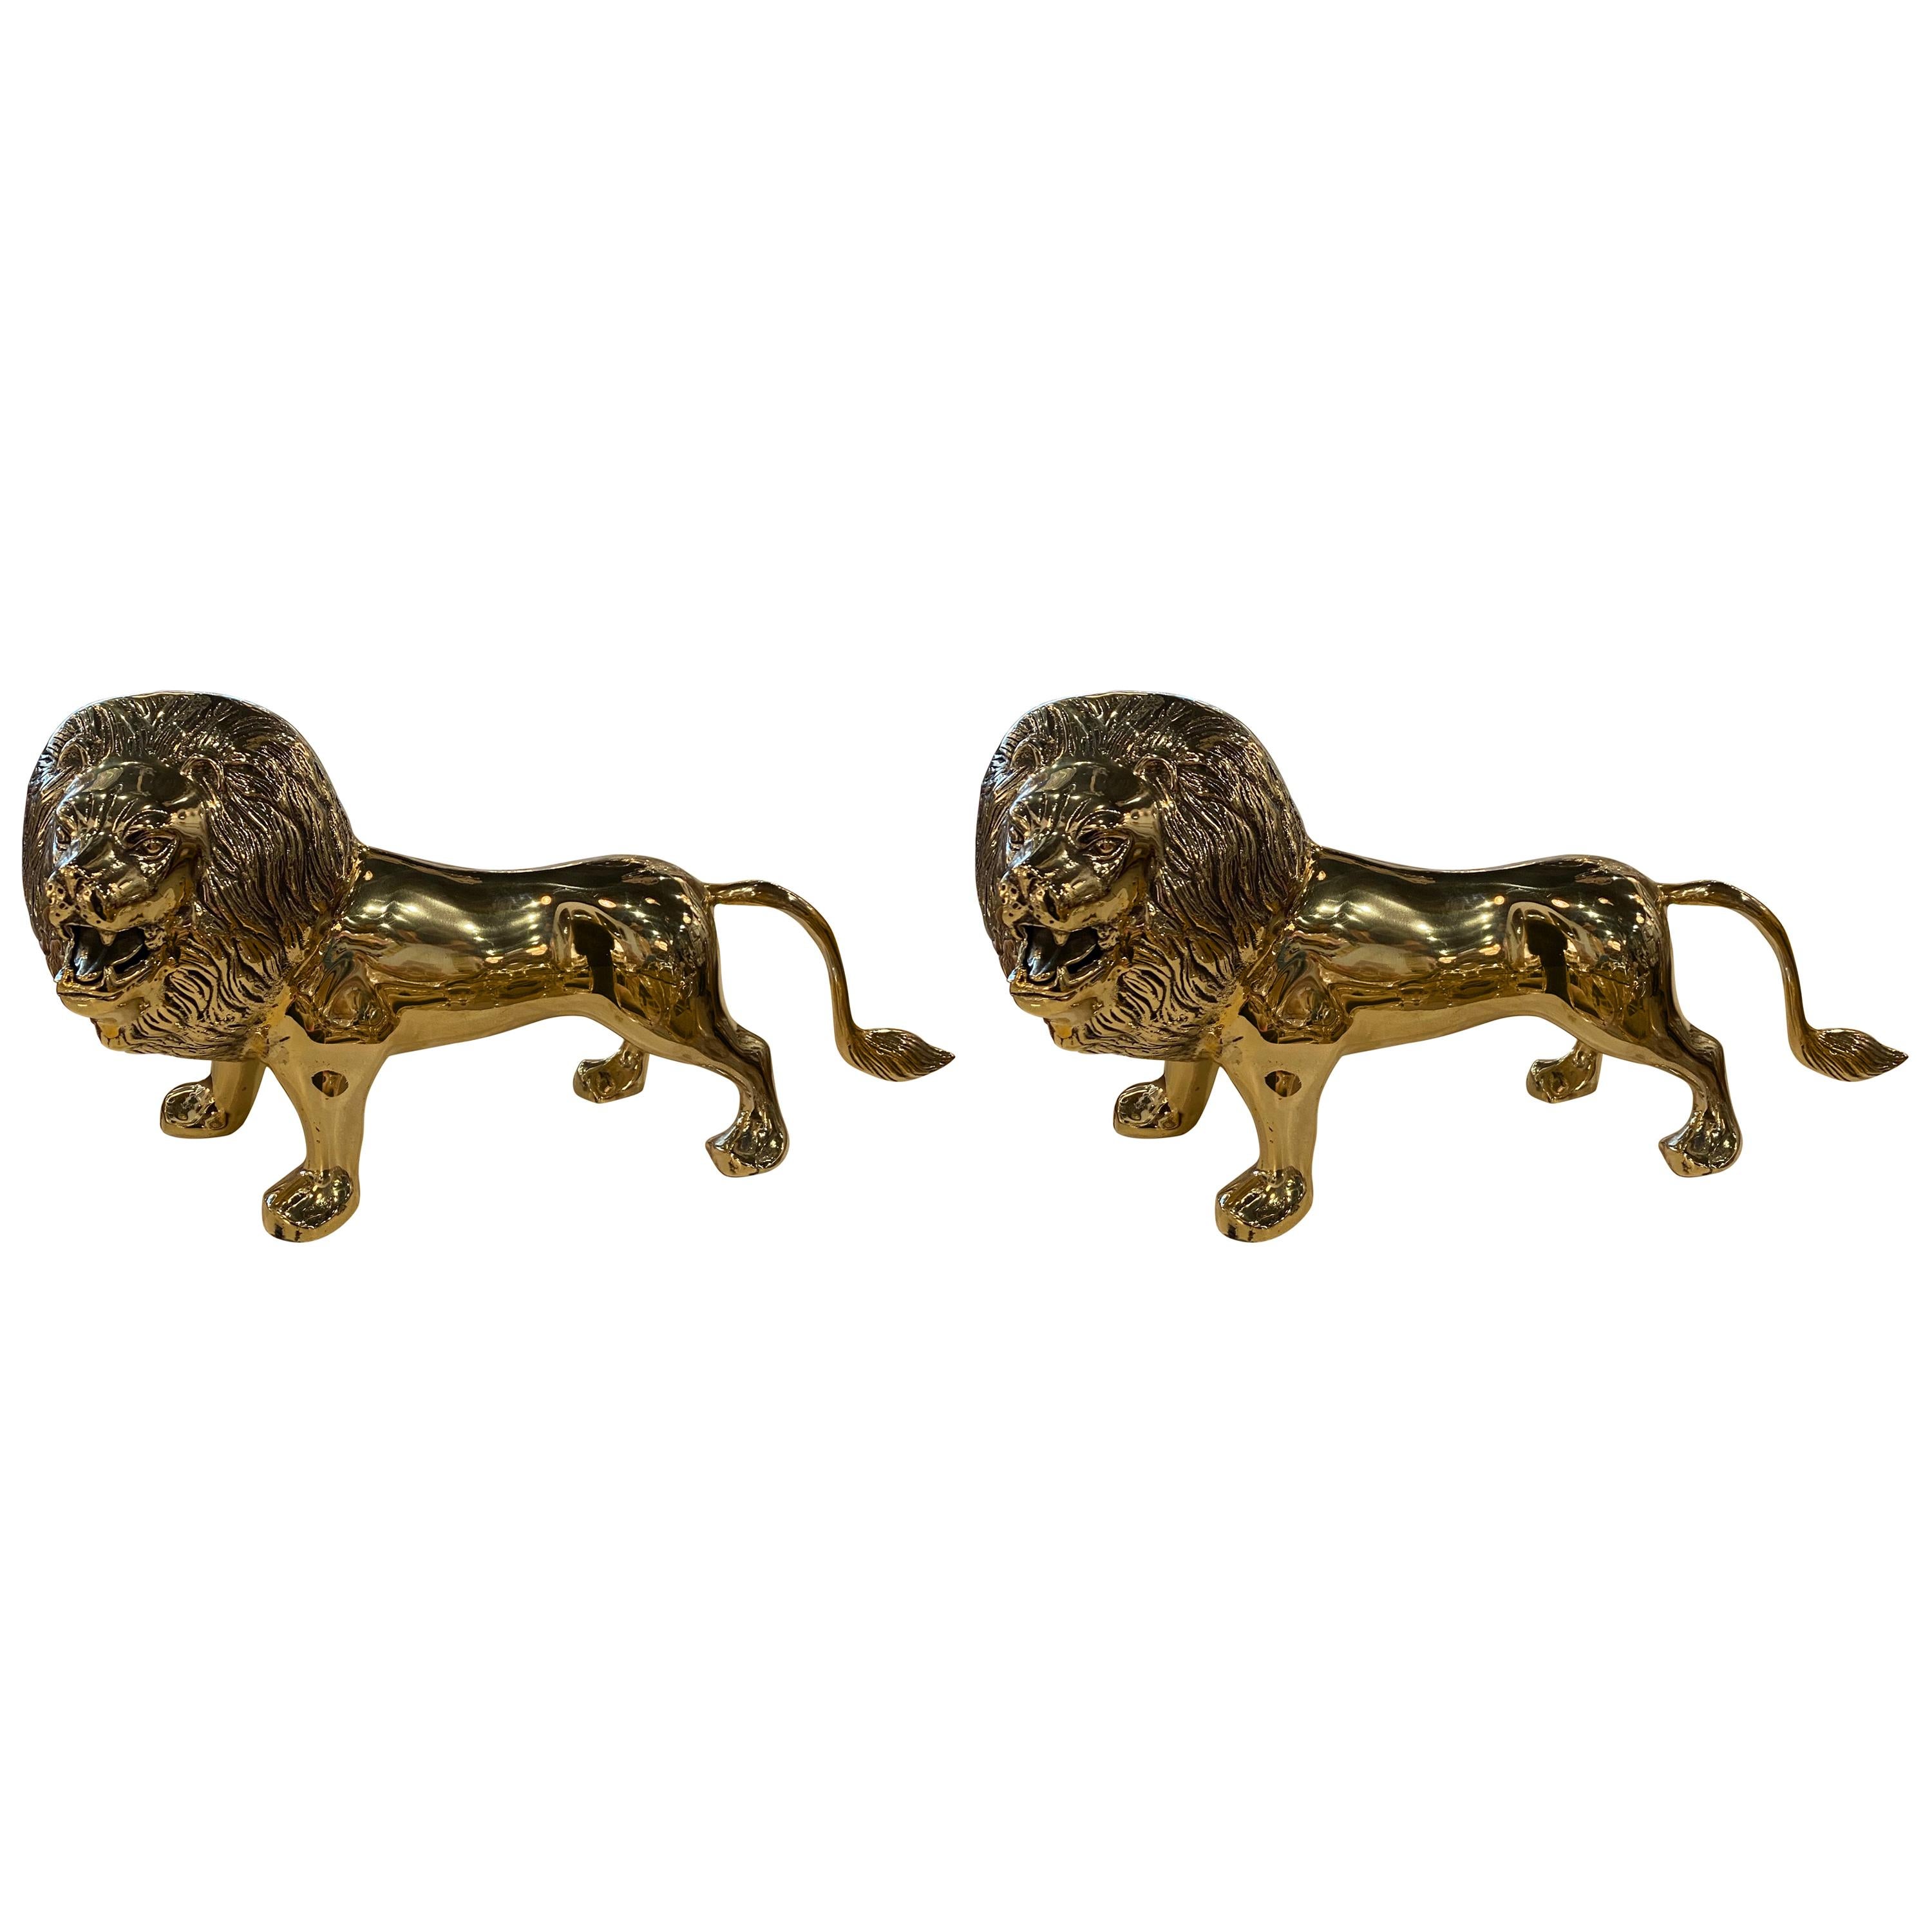 Vintage Polished Brass Lion Statue, Pair Available